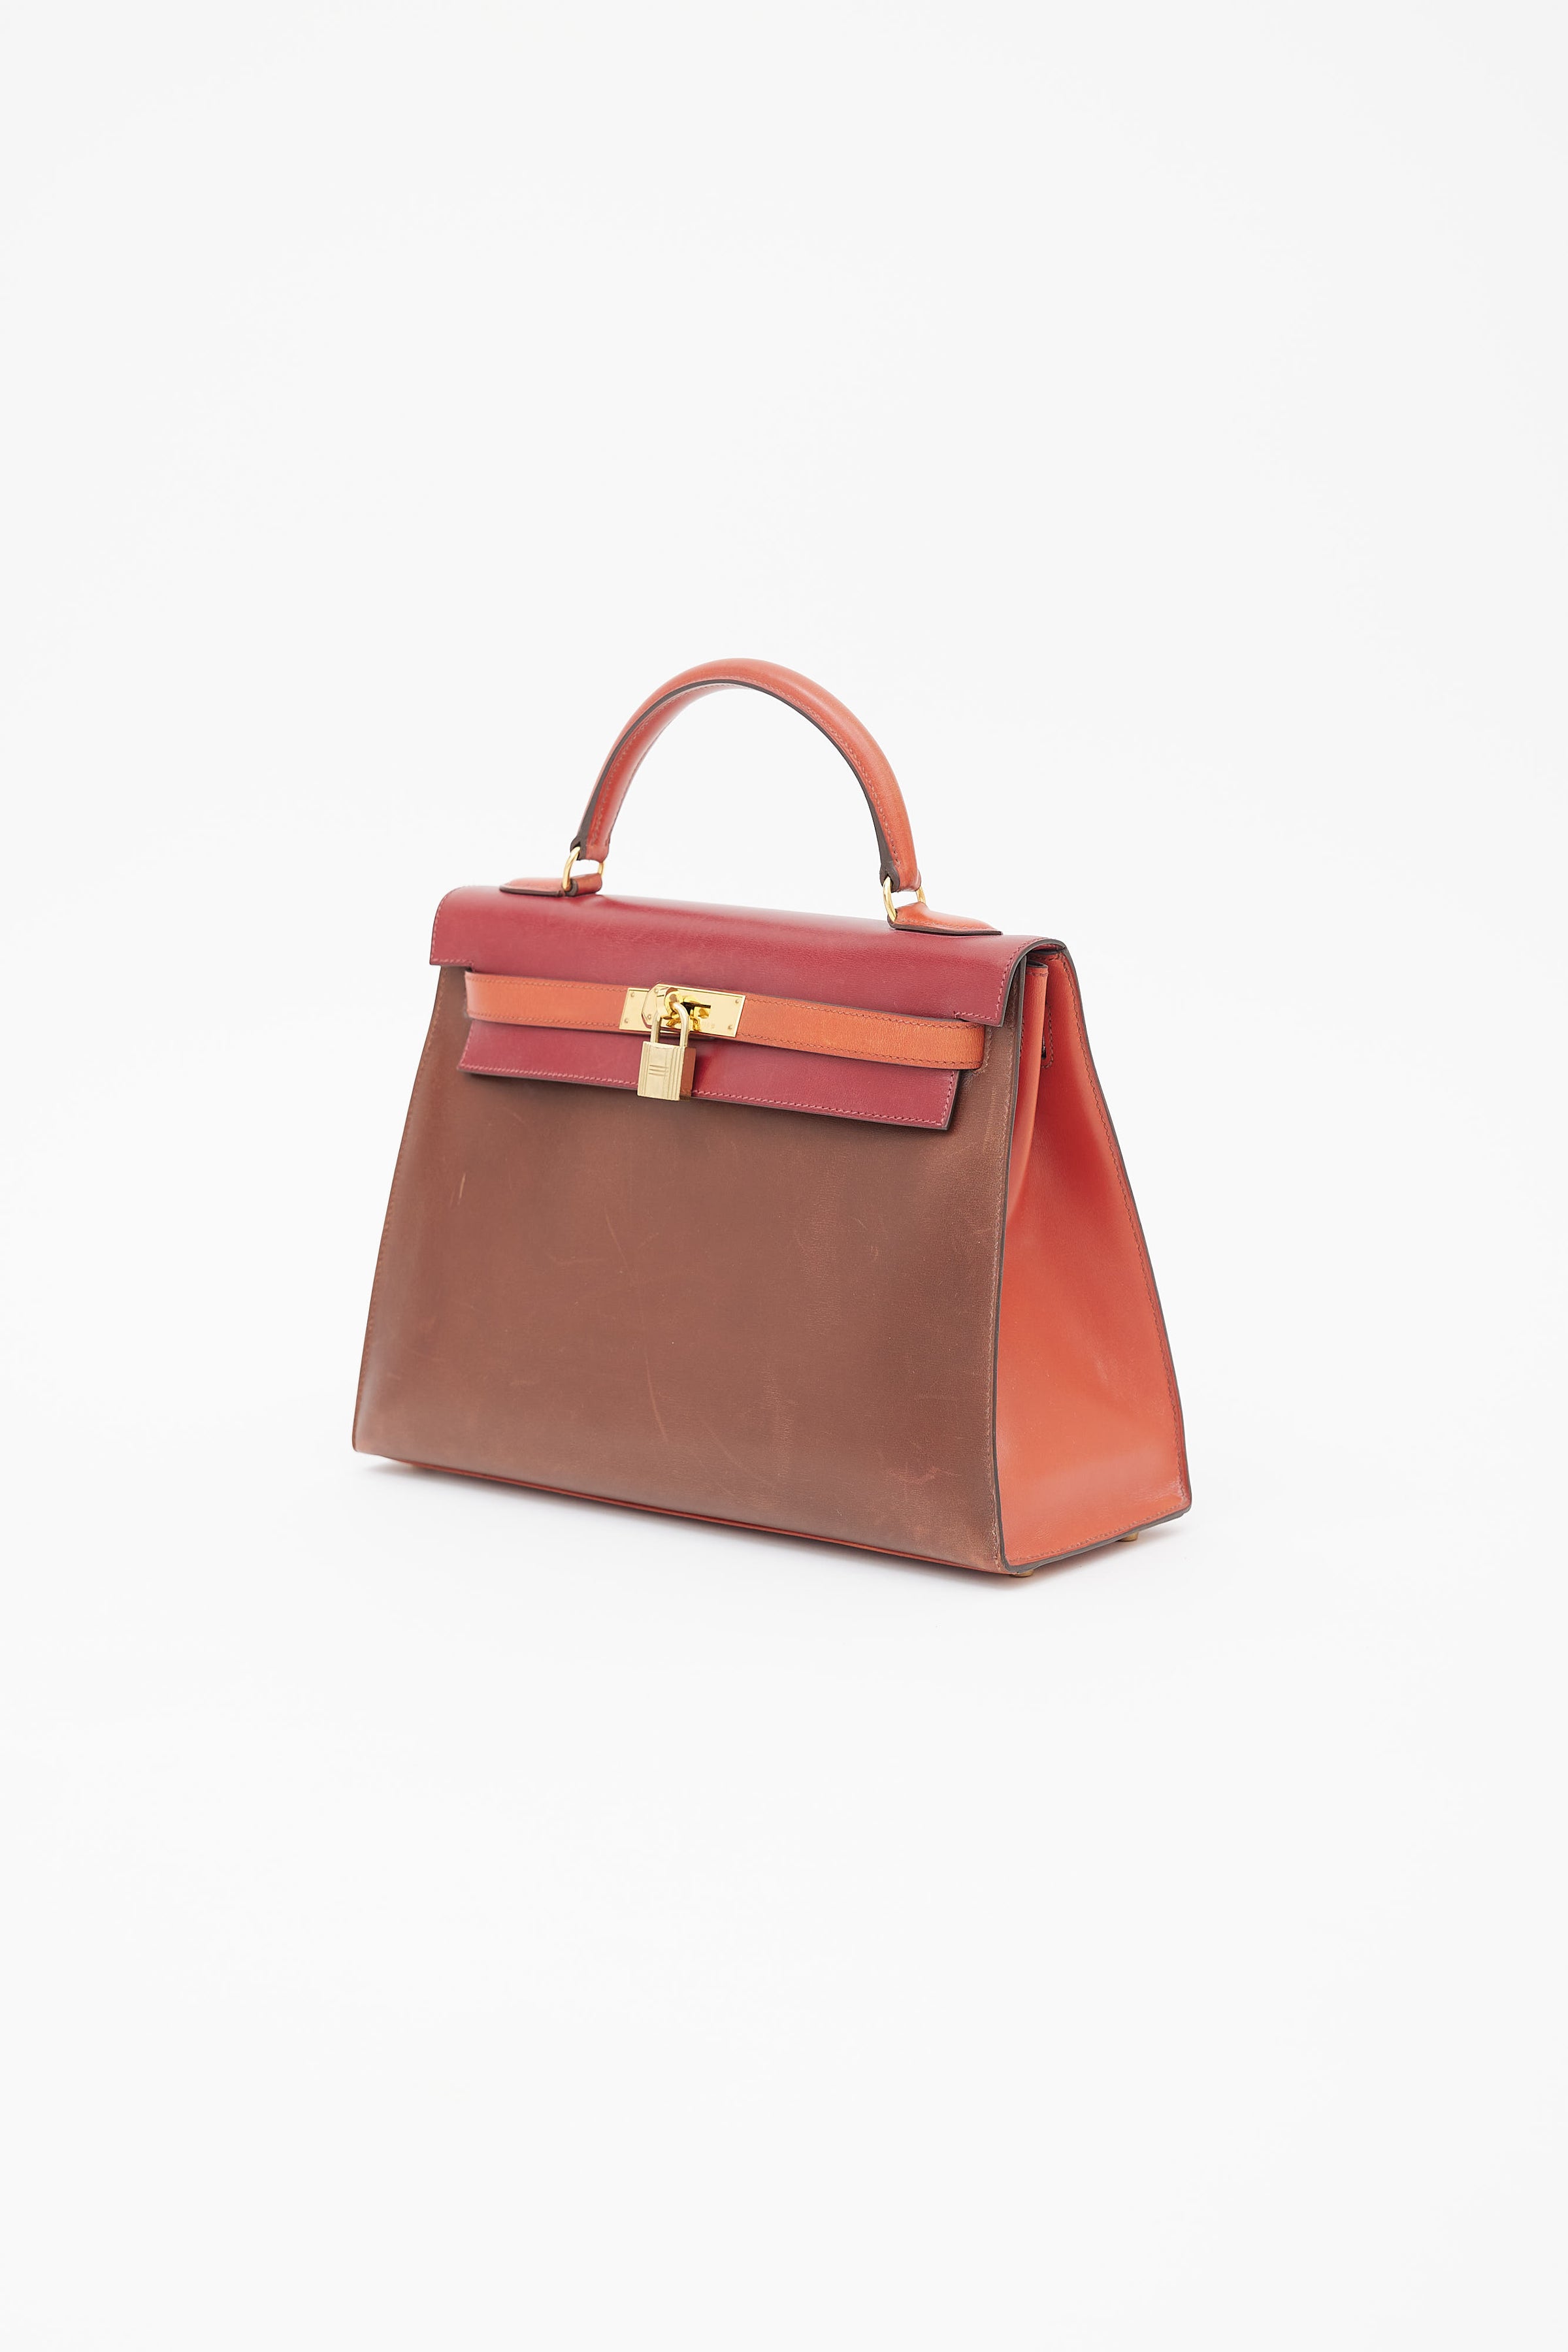 hermes rouge sellier colour